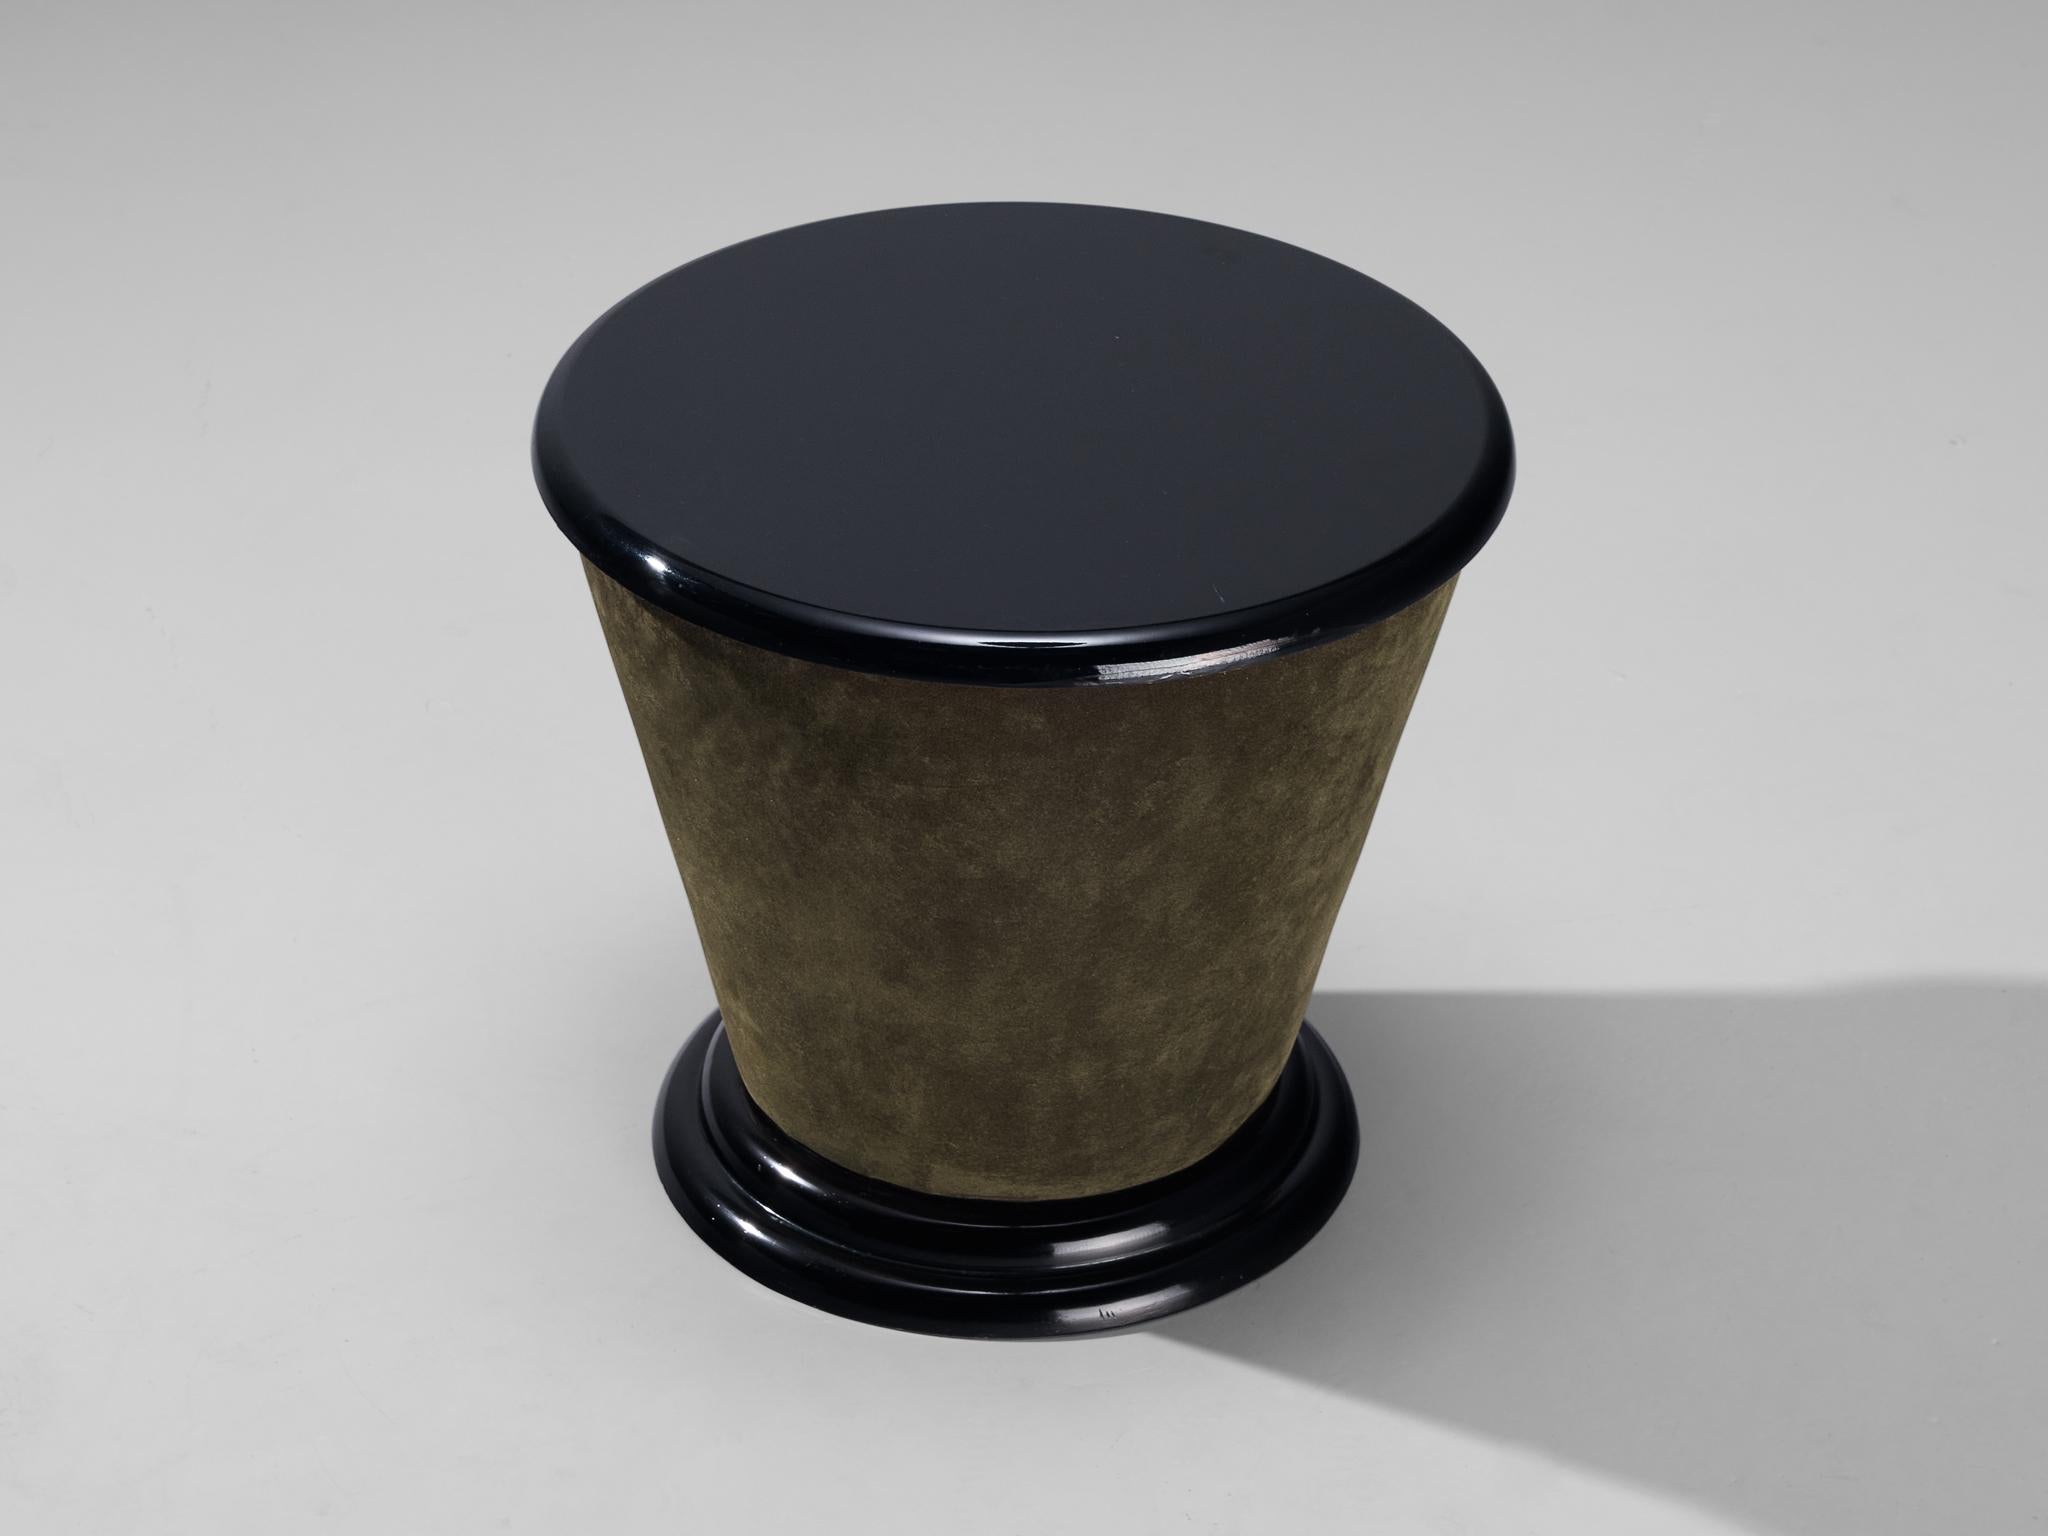 Side table, velvet, lacquered wood, plastic, Italy, 1970s.

Side table of Italian origin covered with a soft velvet material in the color khaki green. The glossy top is executed in black lacquer and the base is made of plastic. A conical-shaped